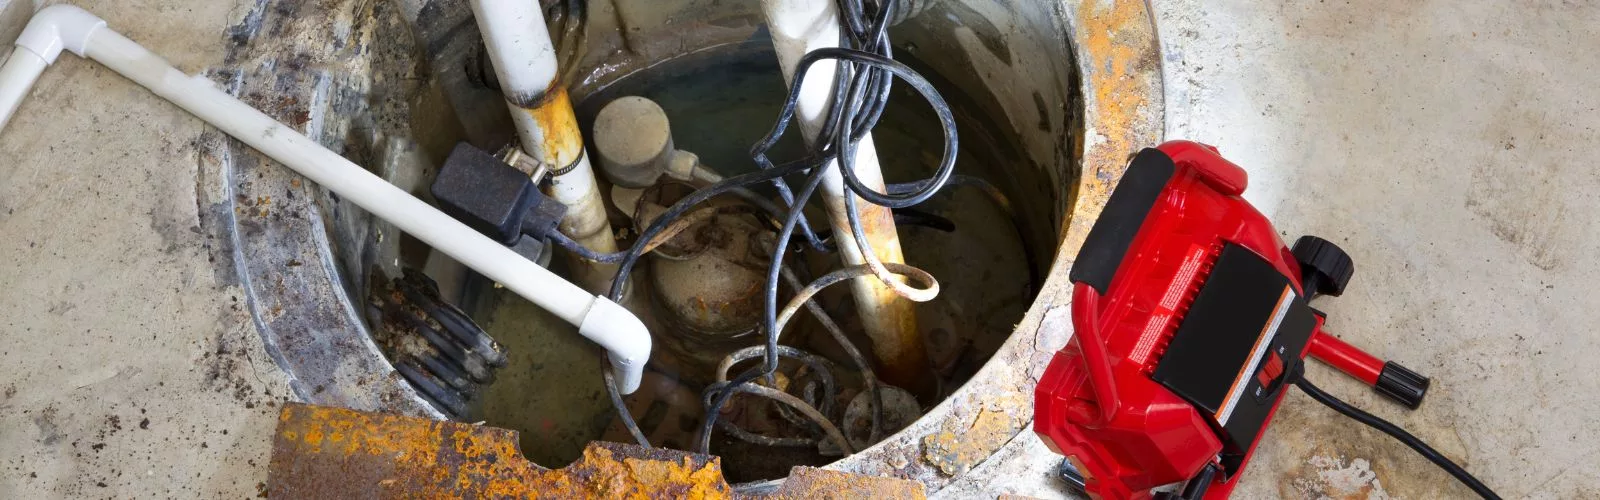 Edmonton Sump Pump Replacement, Repair, and Maintenance by Hot To Cold